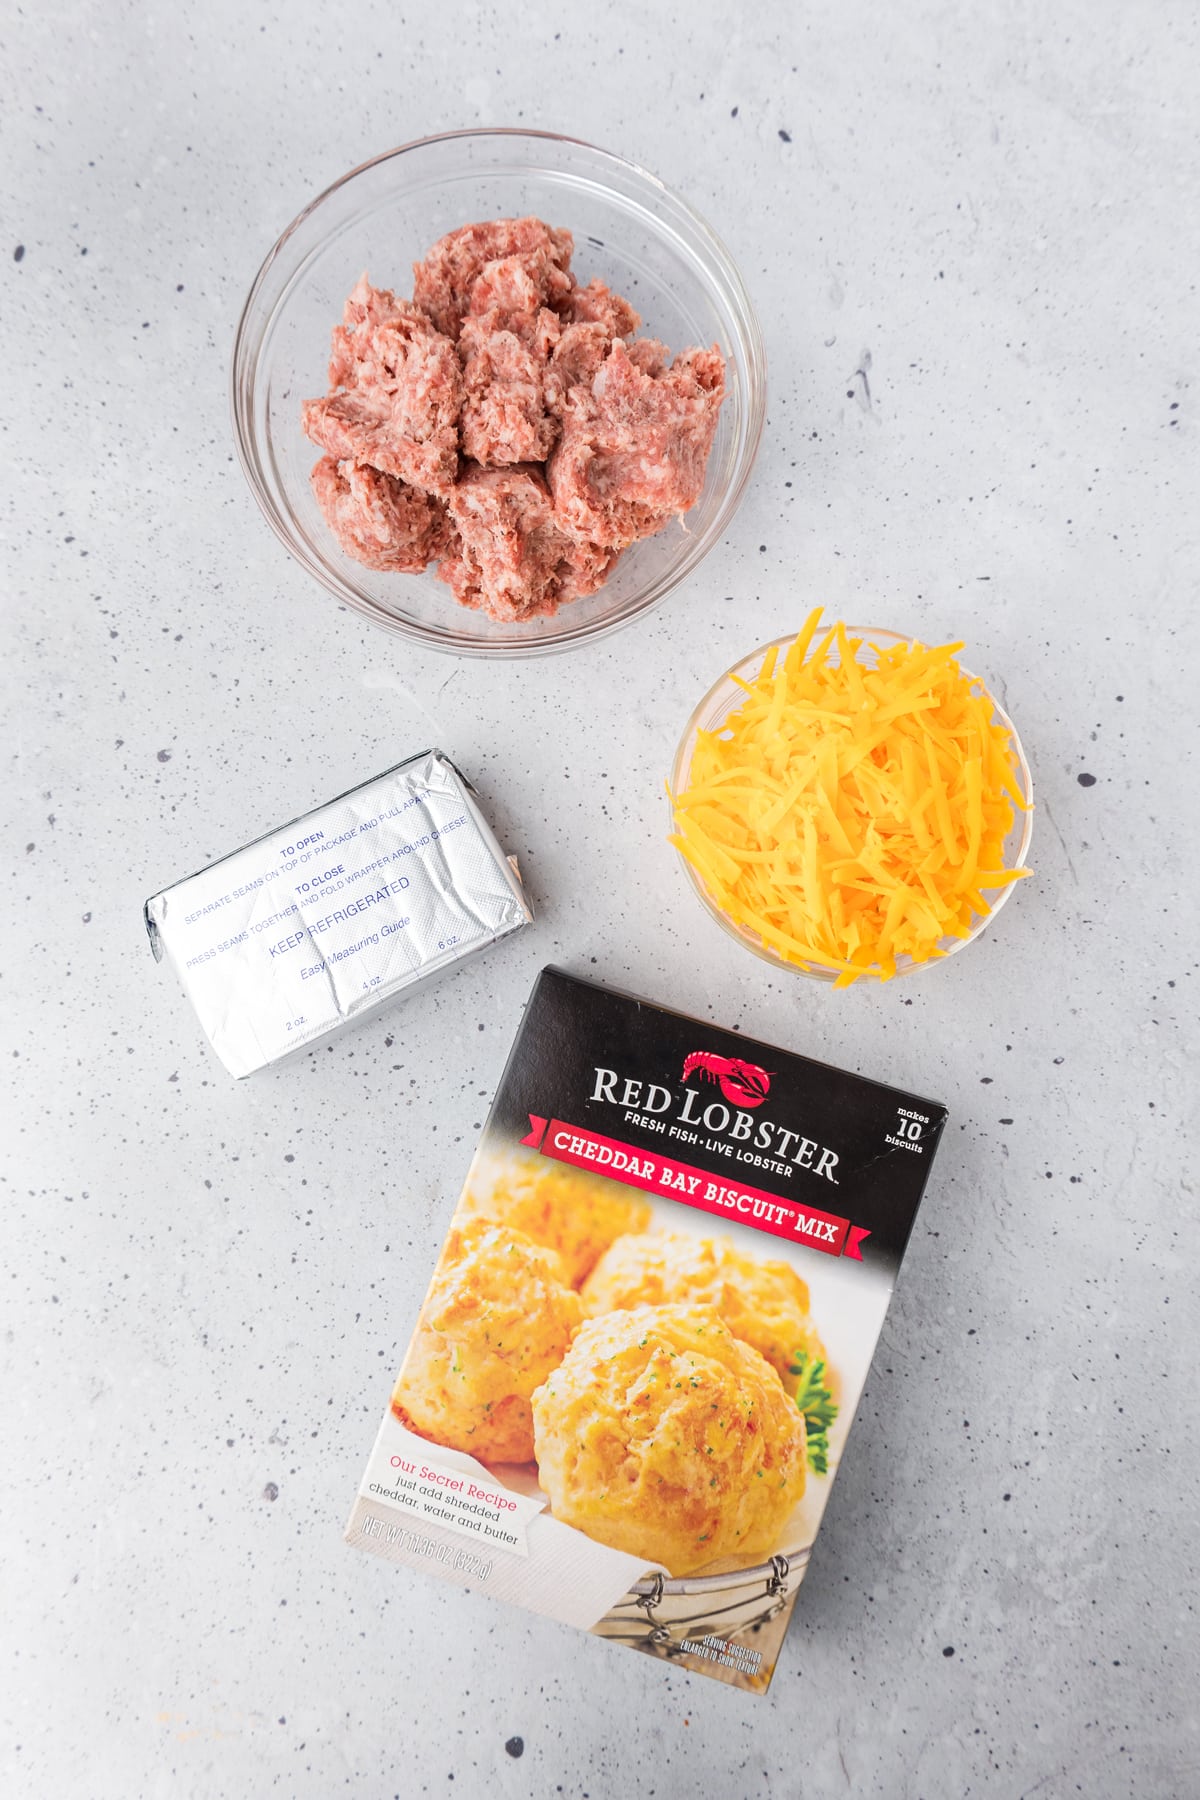 ingredients needed to make cheddar bay sausage biscuits